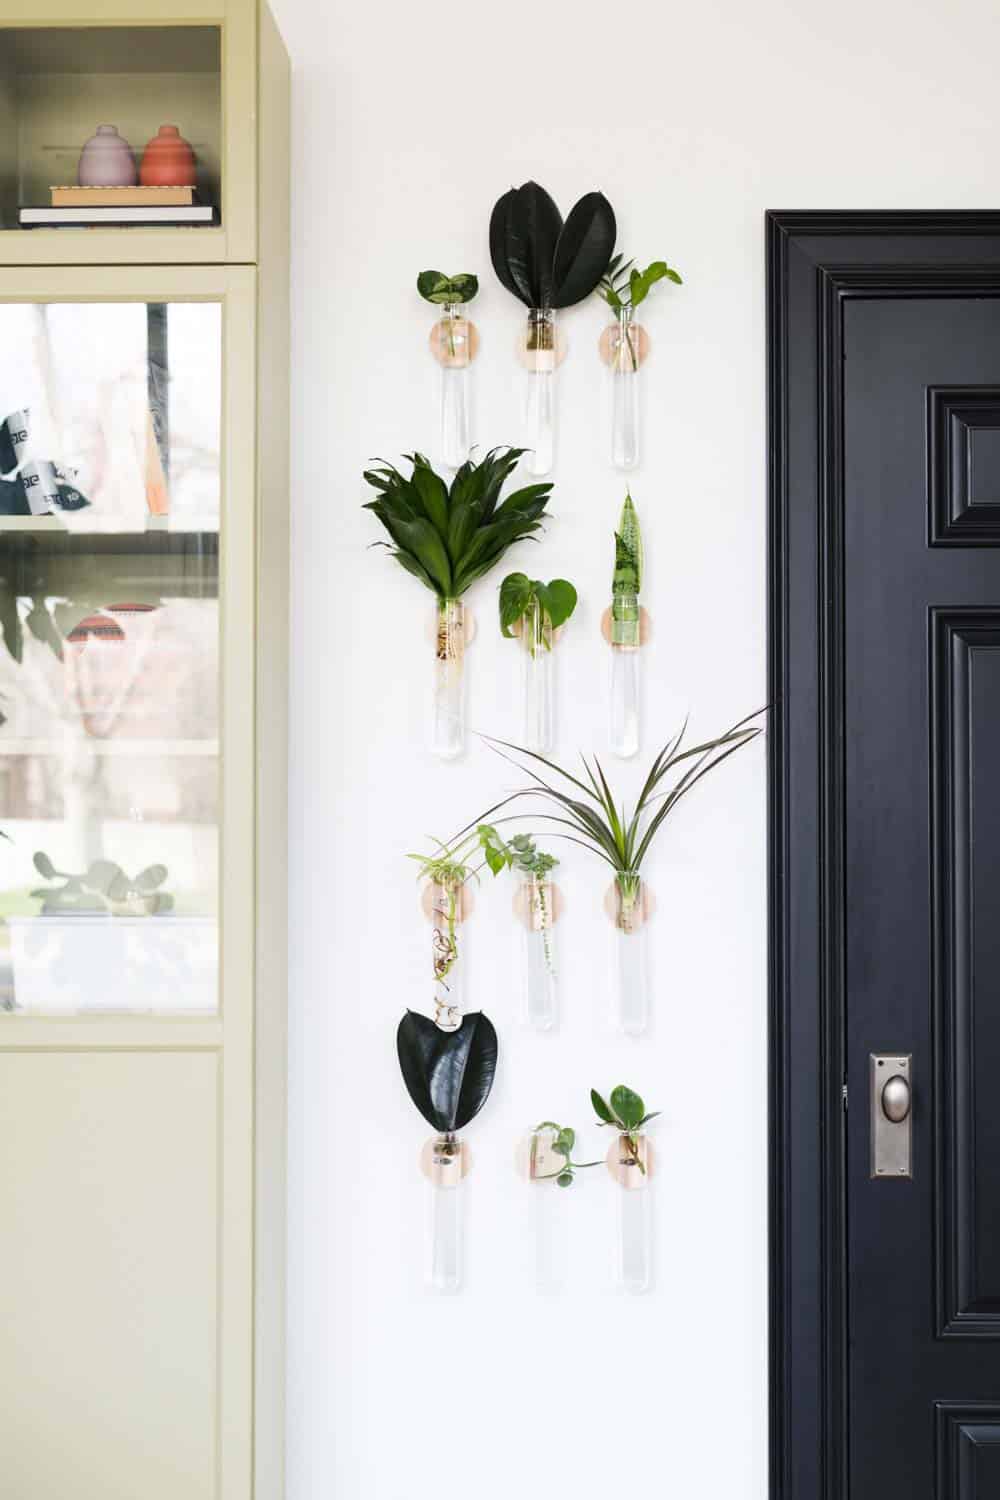 Wall with propagation tubes hanging on it to propagate plants 